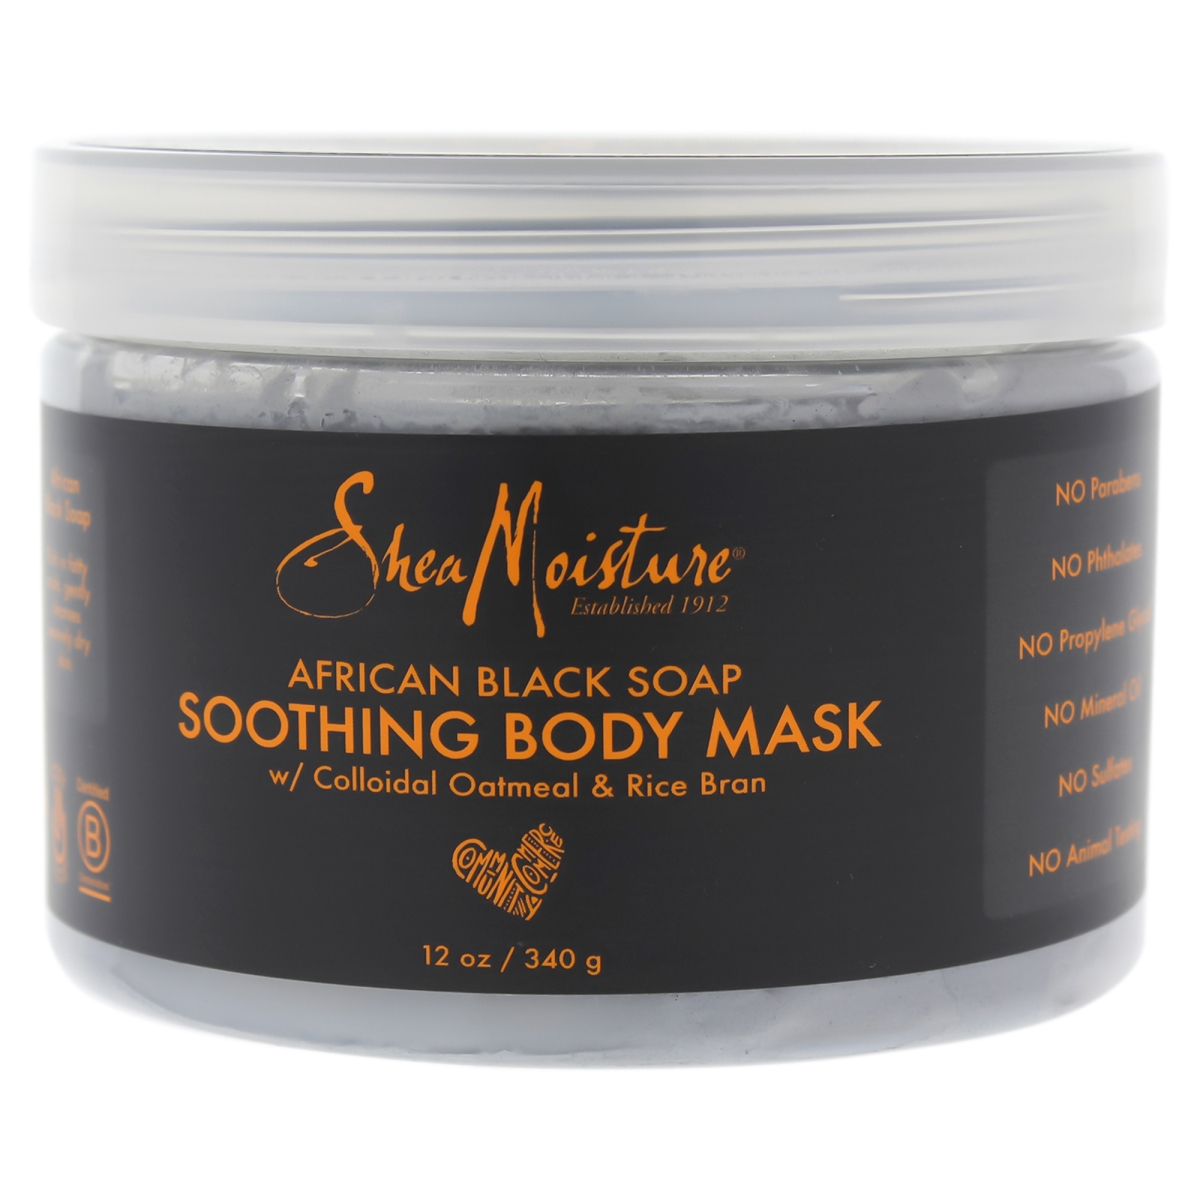 I0084224 African Black Soap Soothing Body Mask For Unisex - 12 Oz